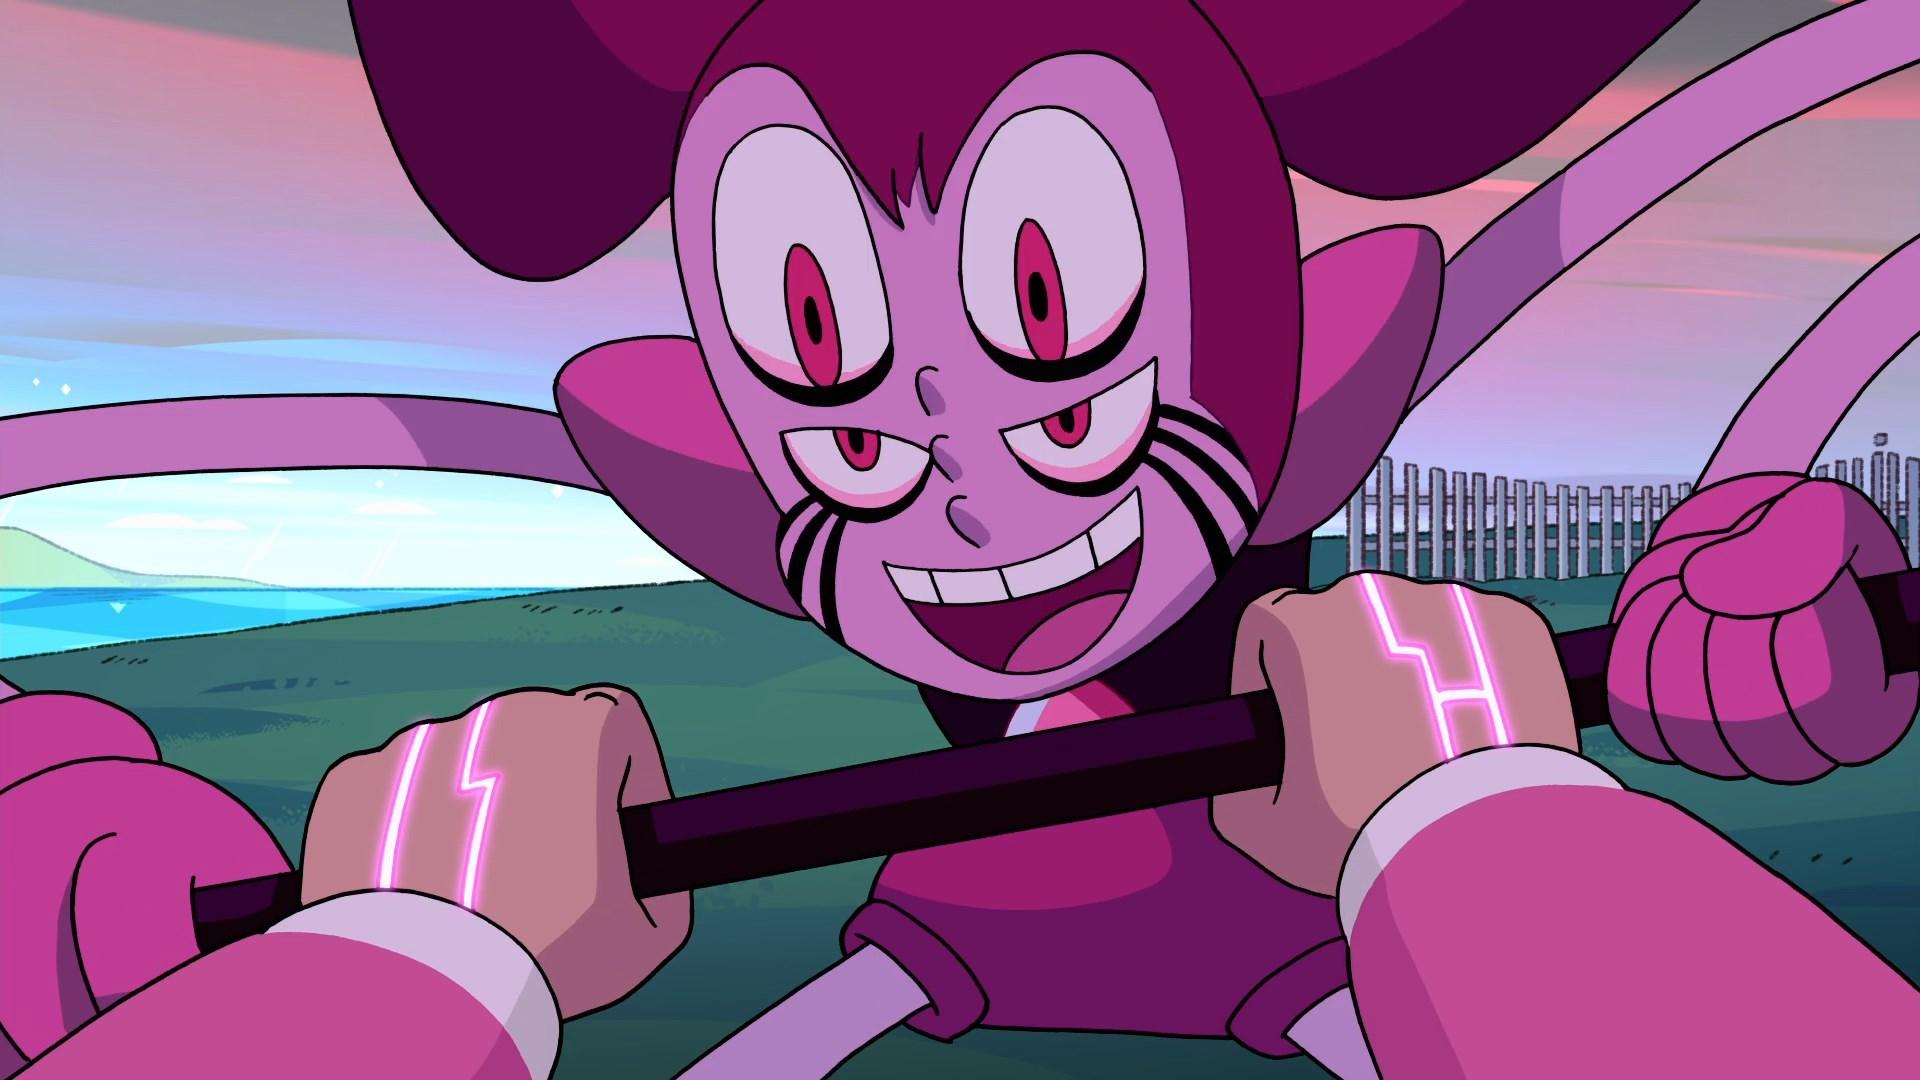 Spinel was a fusion the whole time